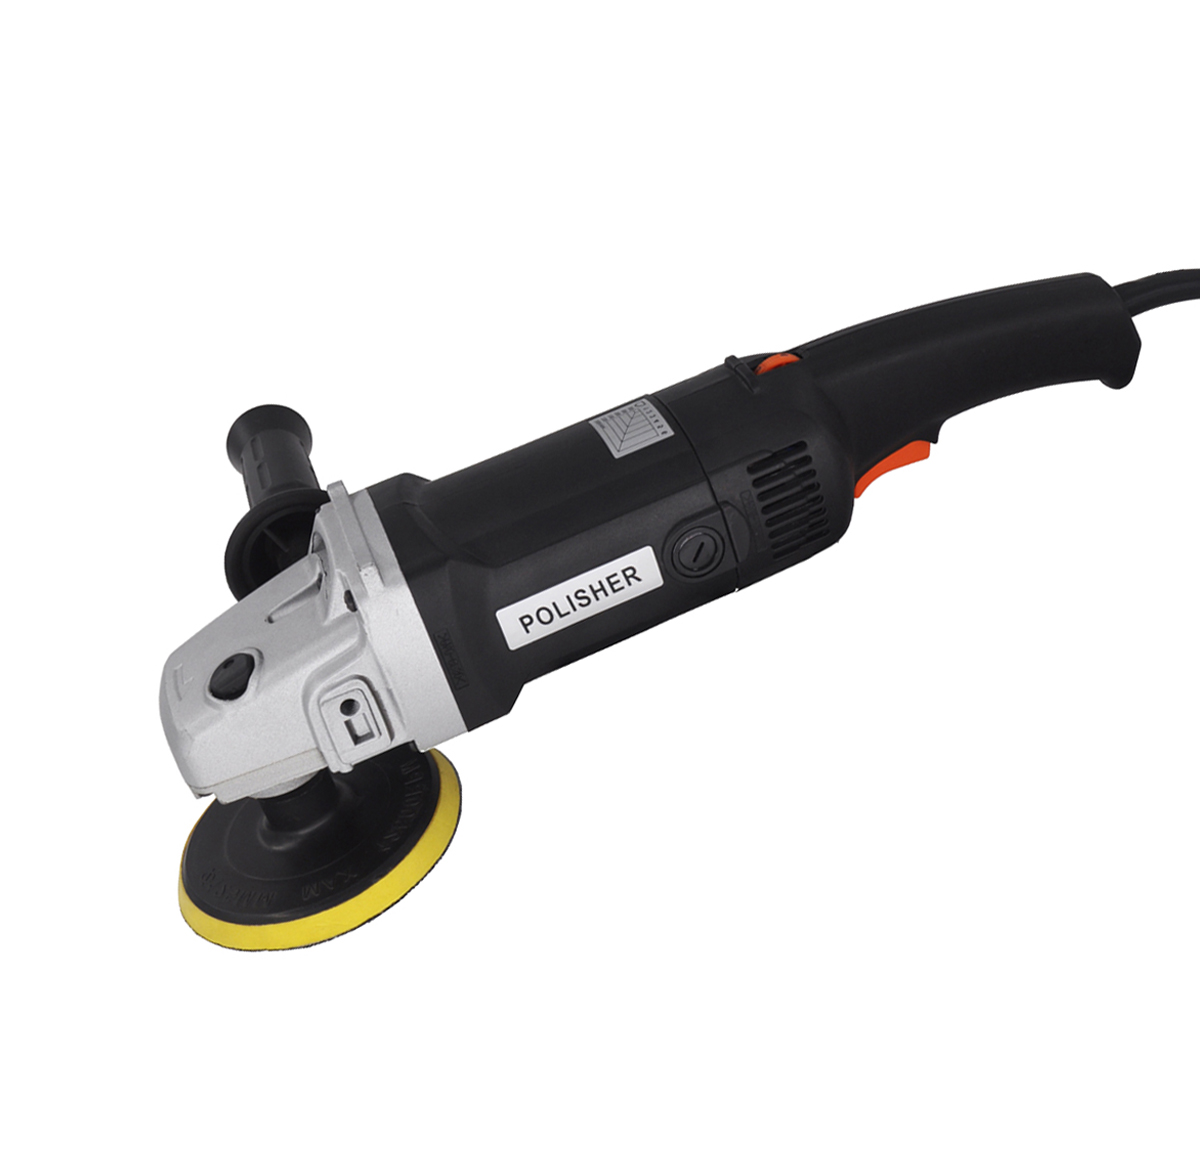 ANSITOOL J0569  900W 5 Inches Plate Rotary  Car Polisher